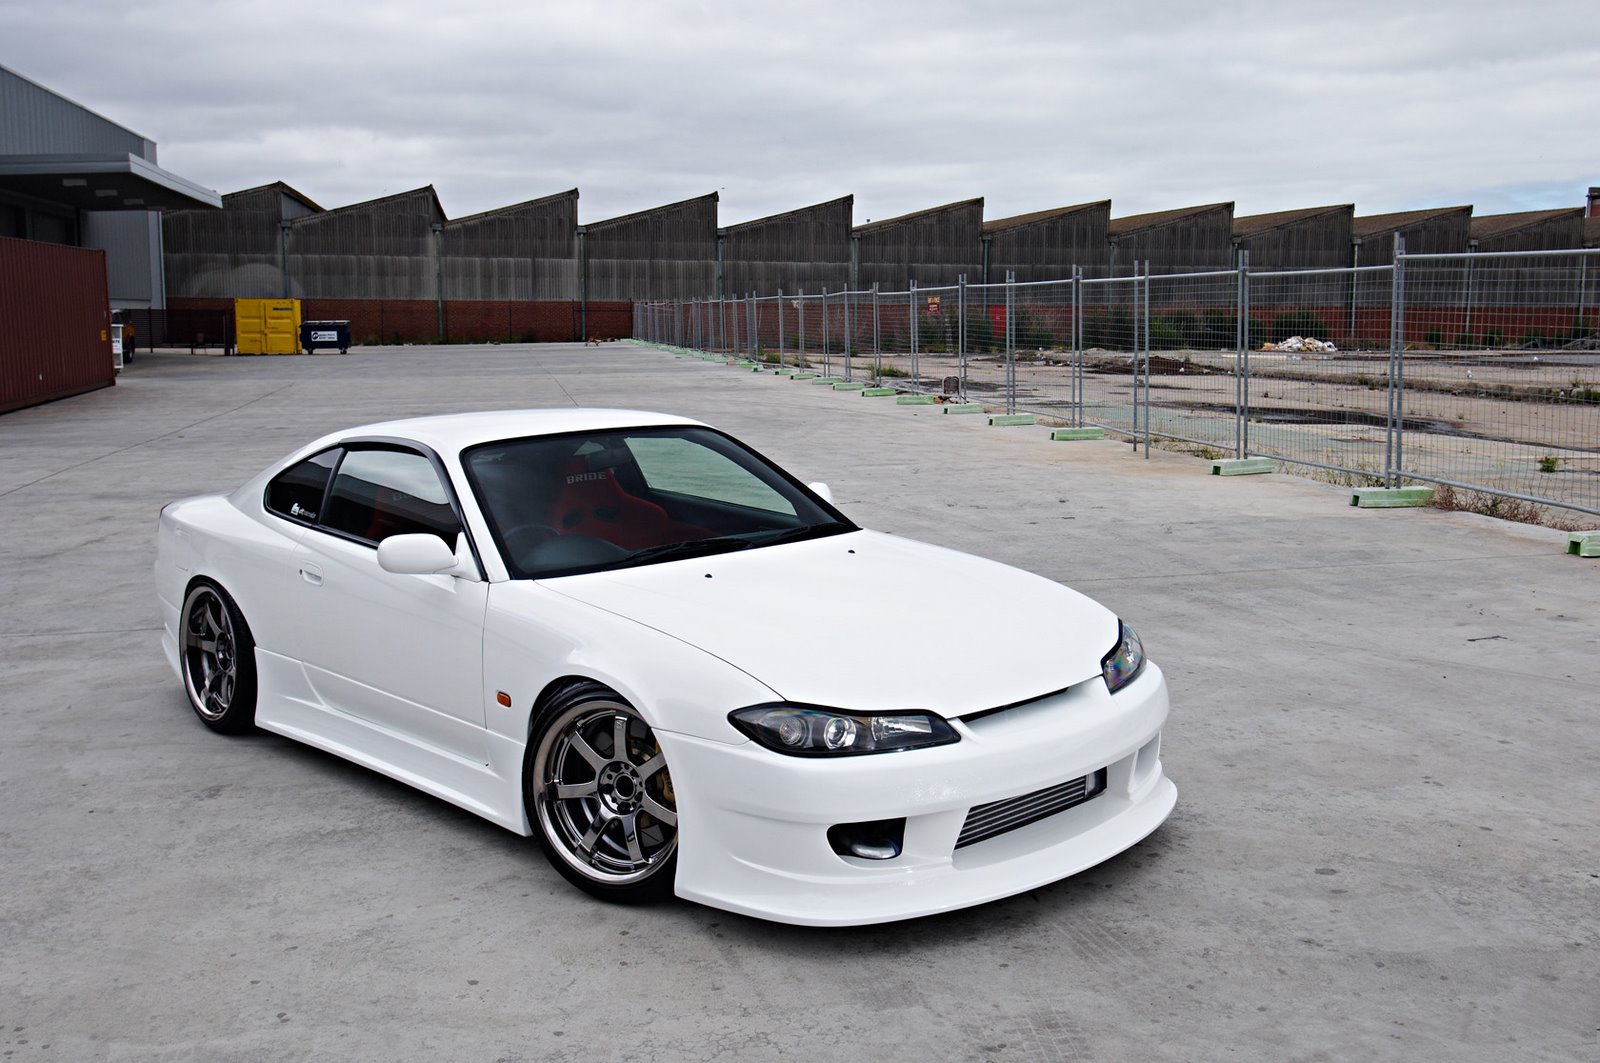 Nissan S15 Silvia Picture Res News Specs Buy Car